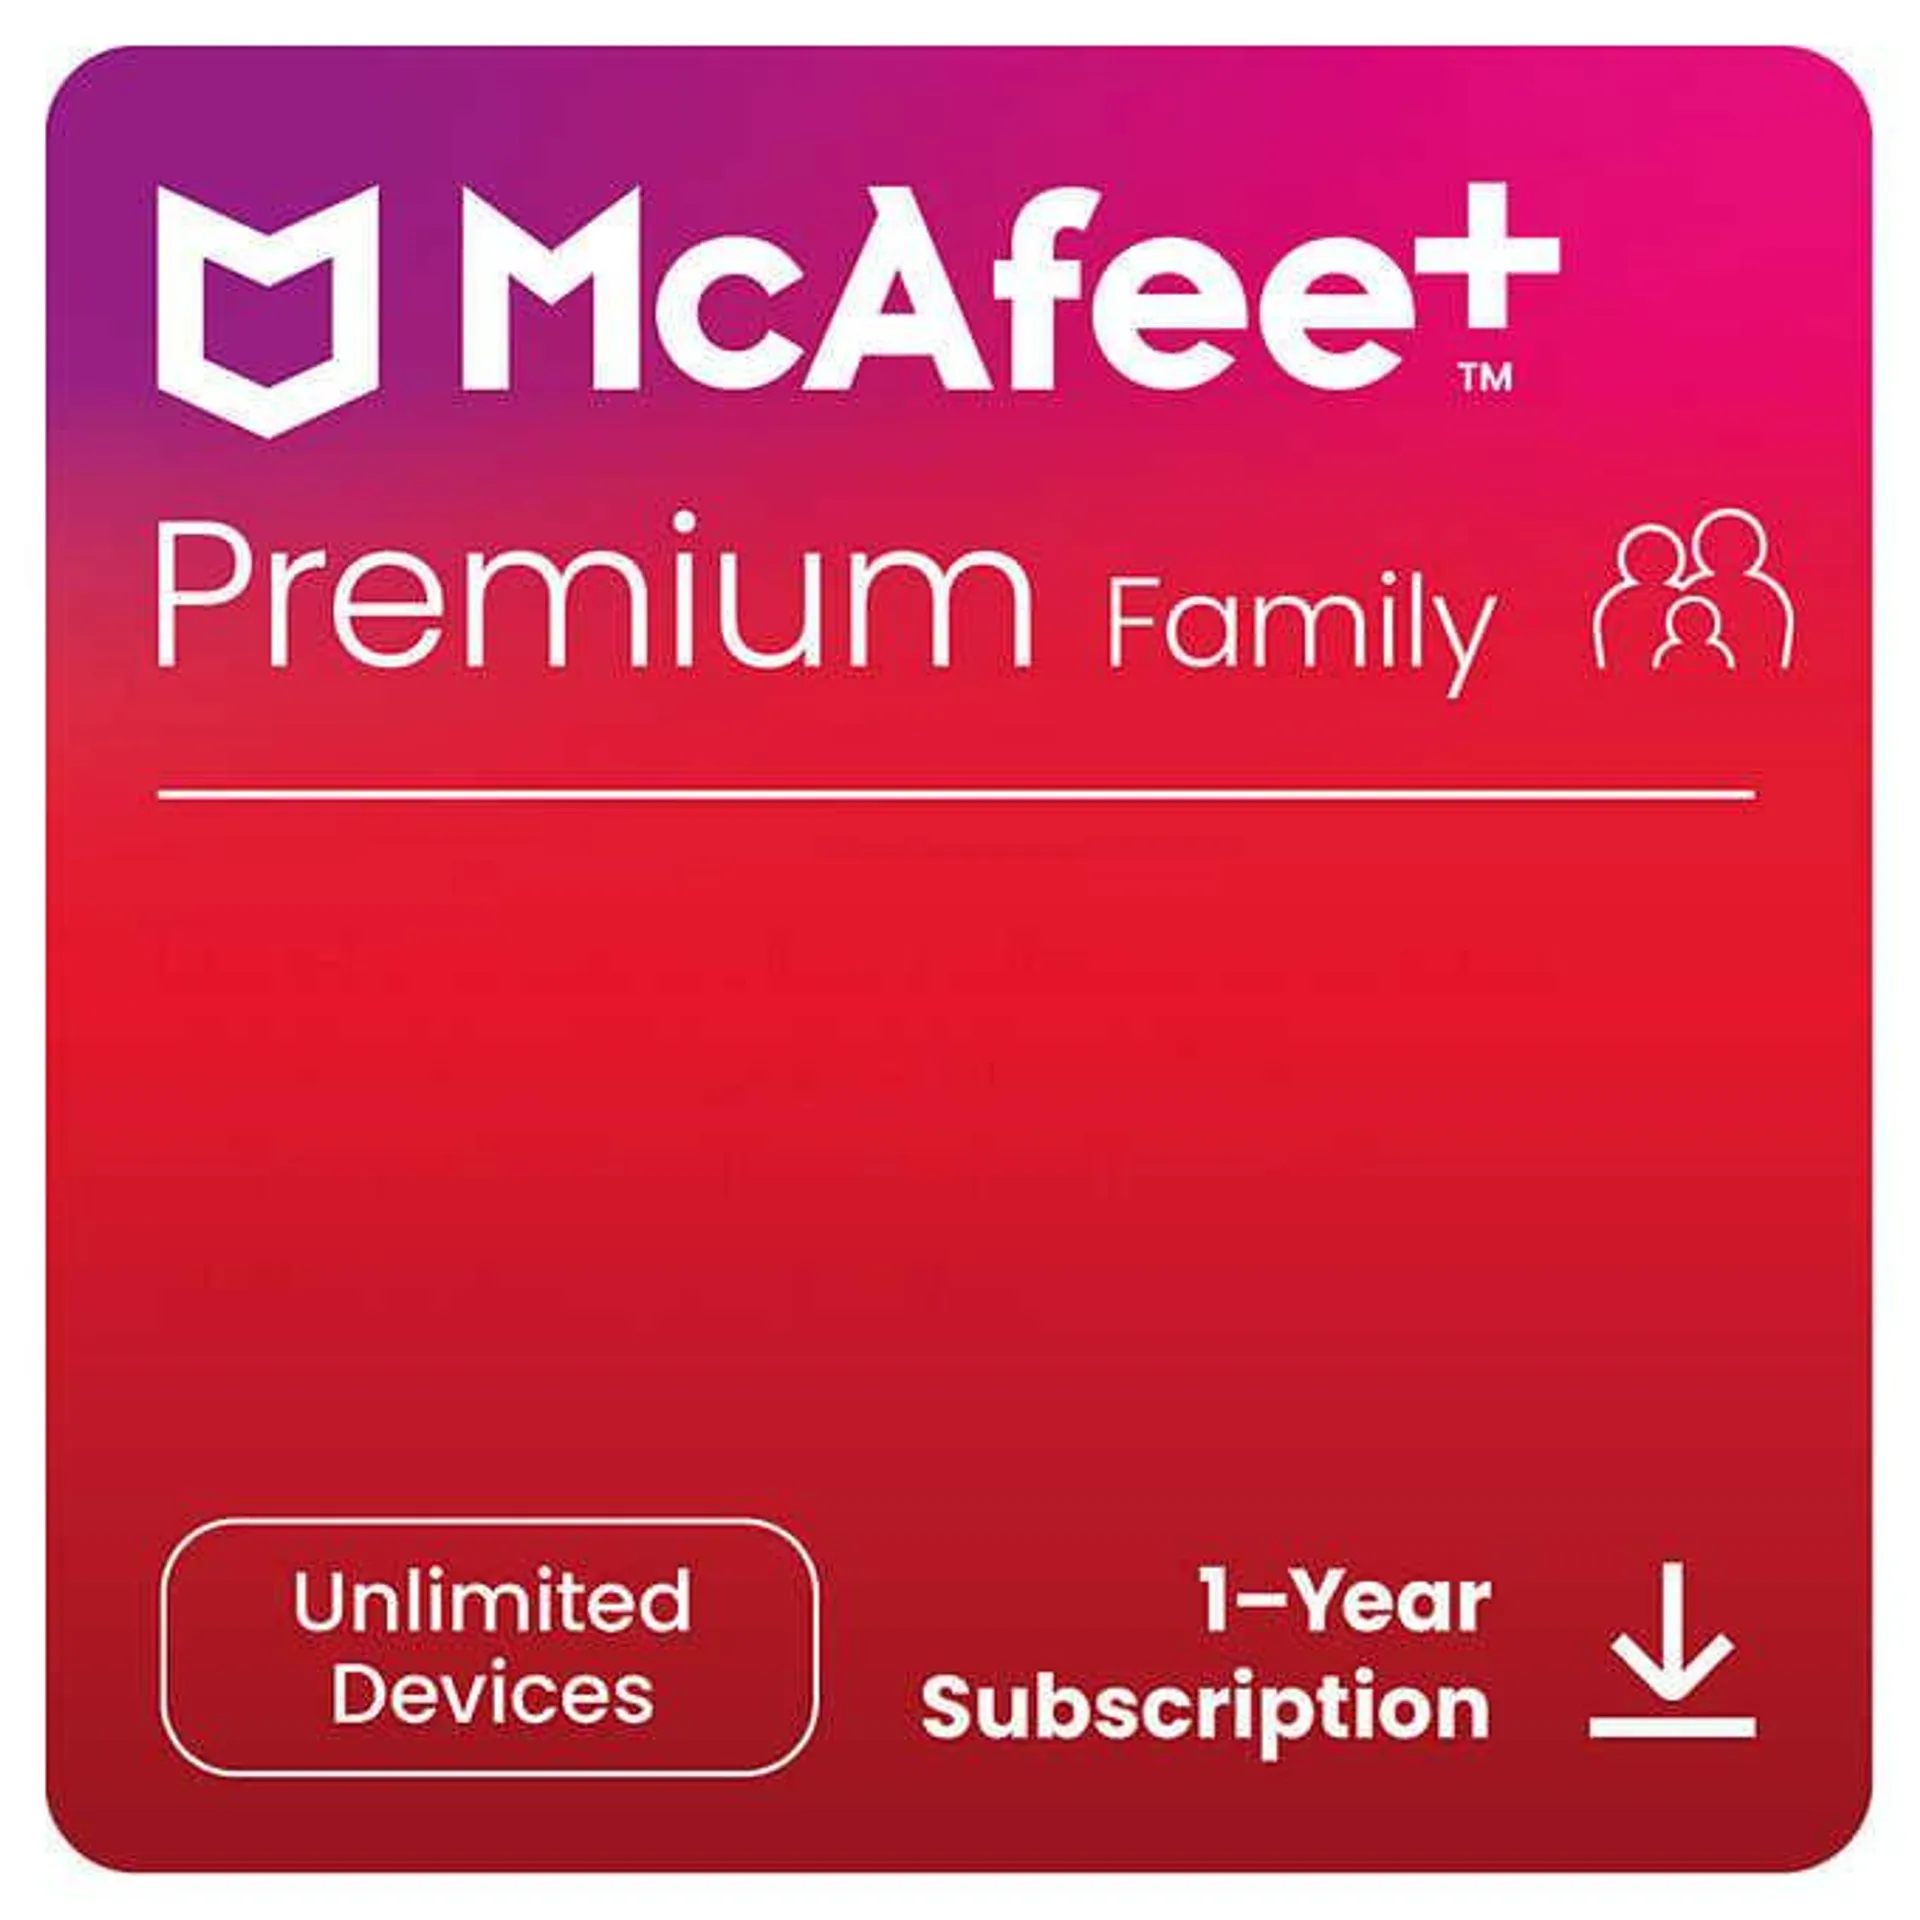 McAfee + Premium Family, Unlimited Devices, 1-Year Subscription (E-delivery)